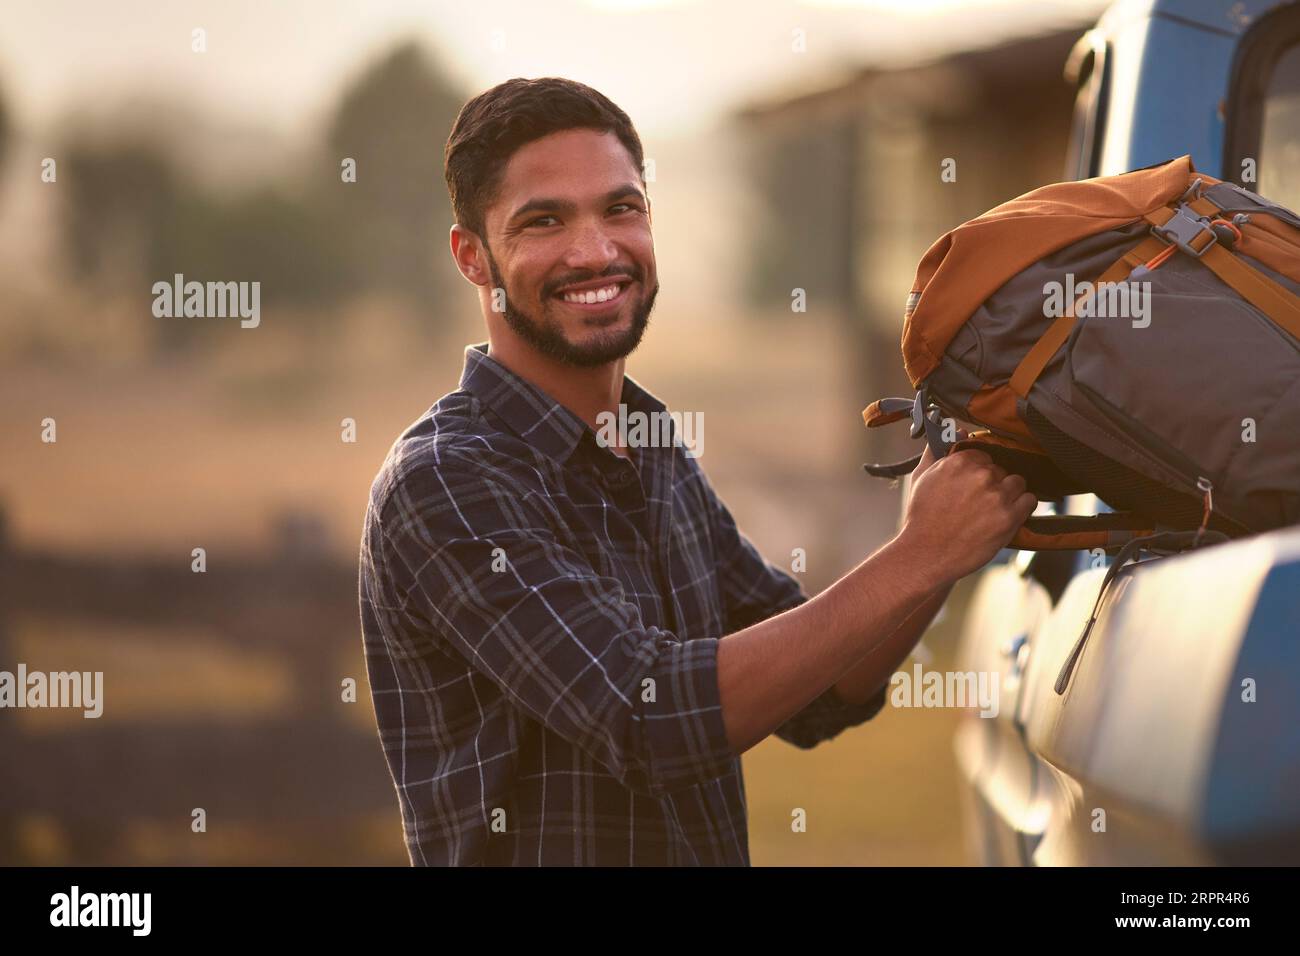 Portrait Of Man Loading Backpack Into Pick Up Truck For Road Trip To Cabin In Countryside Stock Photo